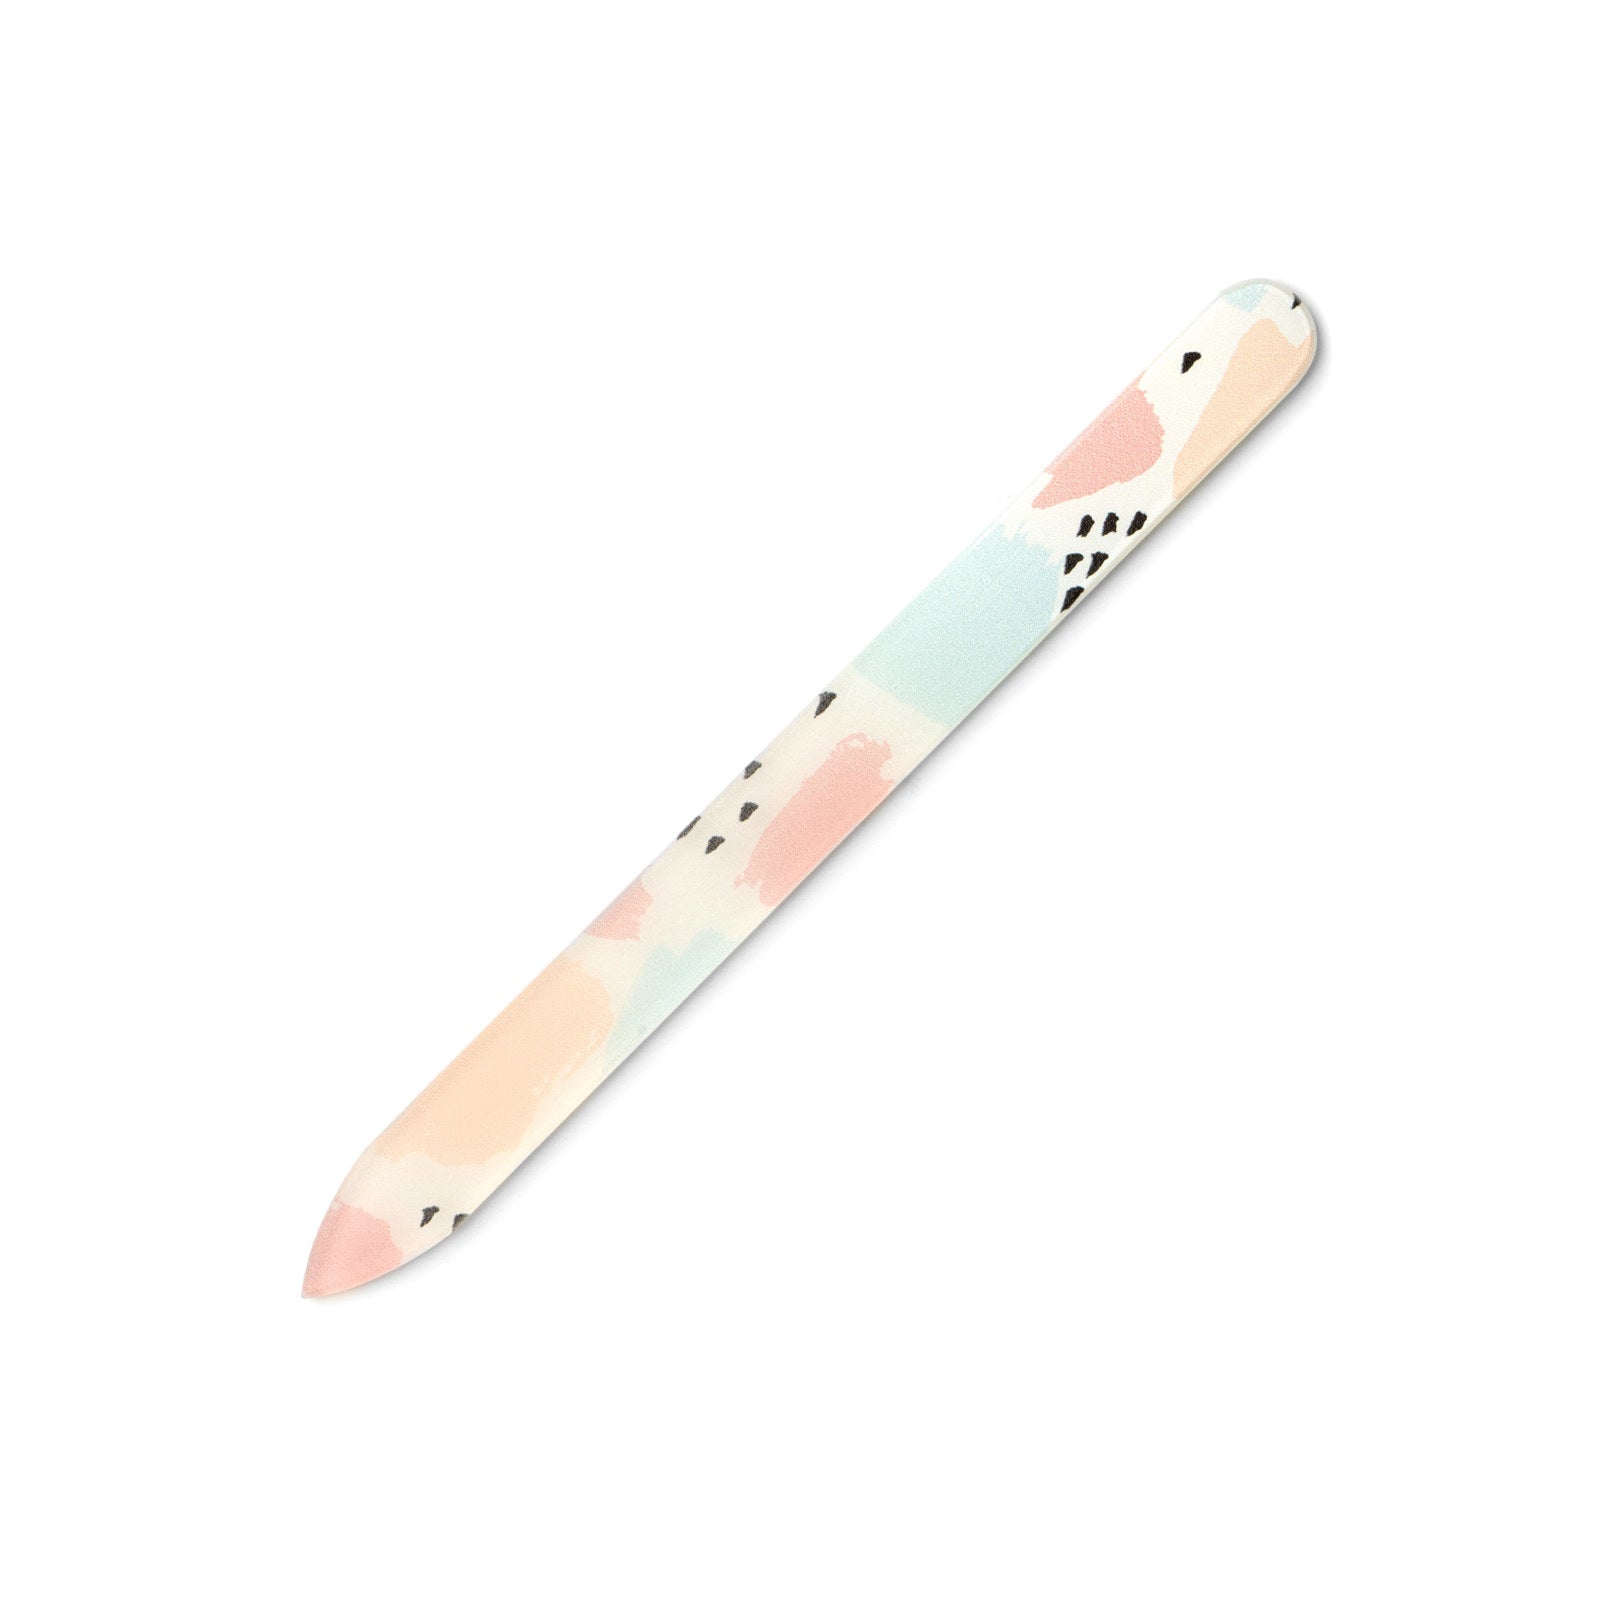 Shop Better Shape Up Glass Nail Files-Nail Care at Ruby Joy Boutique, a Women's Clothing Store in Pickerington, Ohio